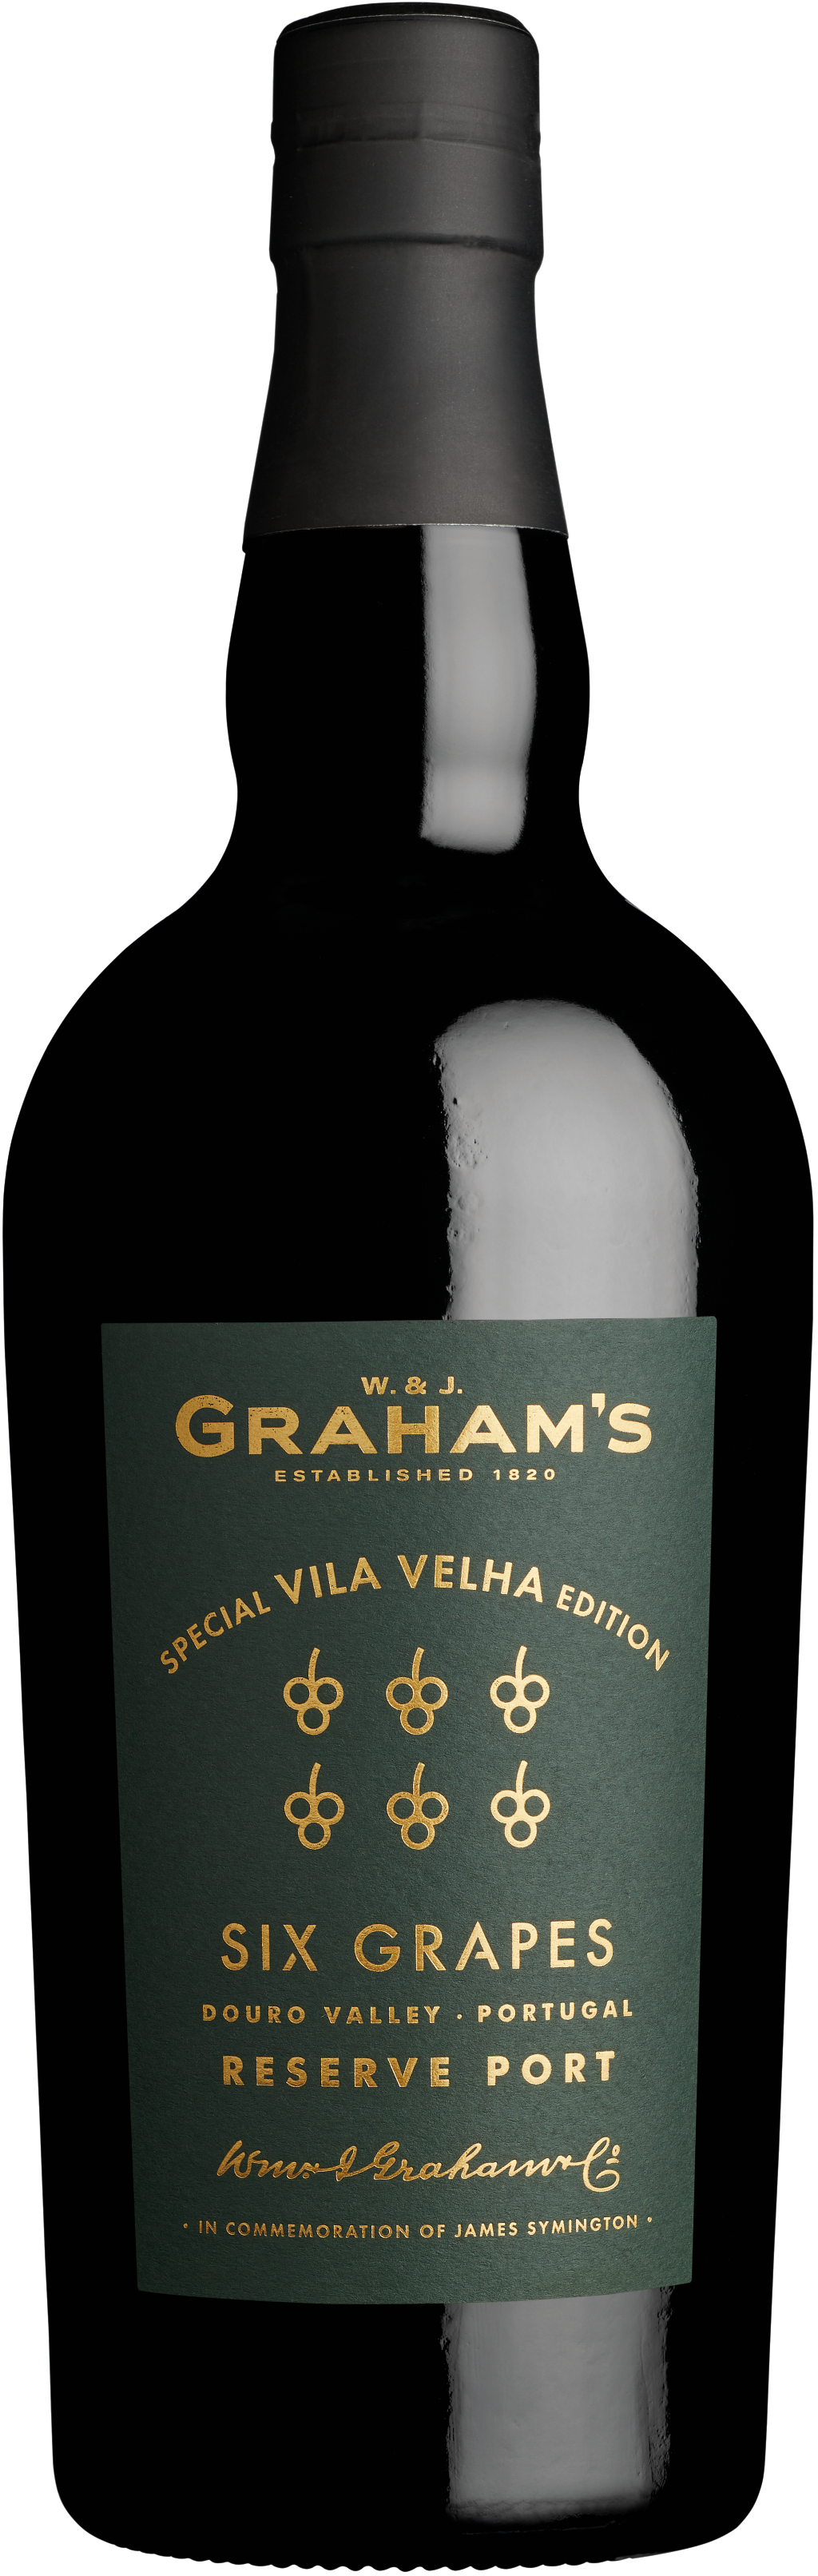 Product Image for GRAHAM'S SIX GRAPES 'SPECIAL VILHA VELHA EDITION'